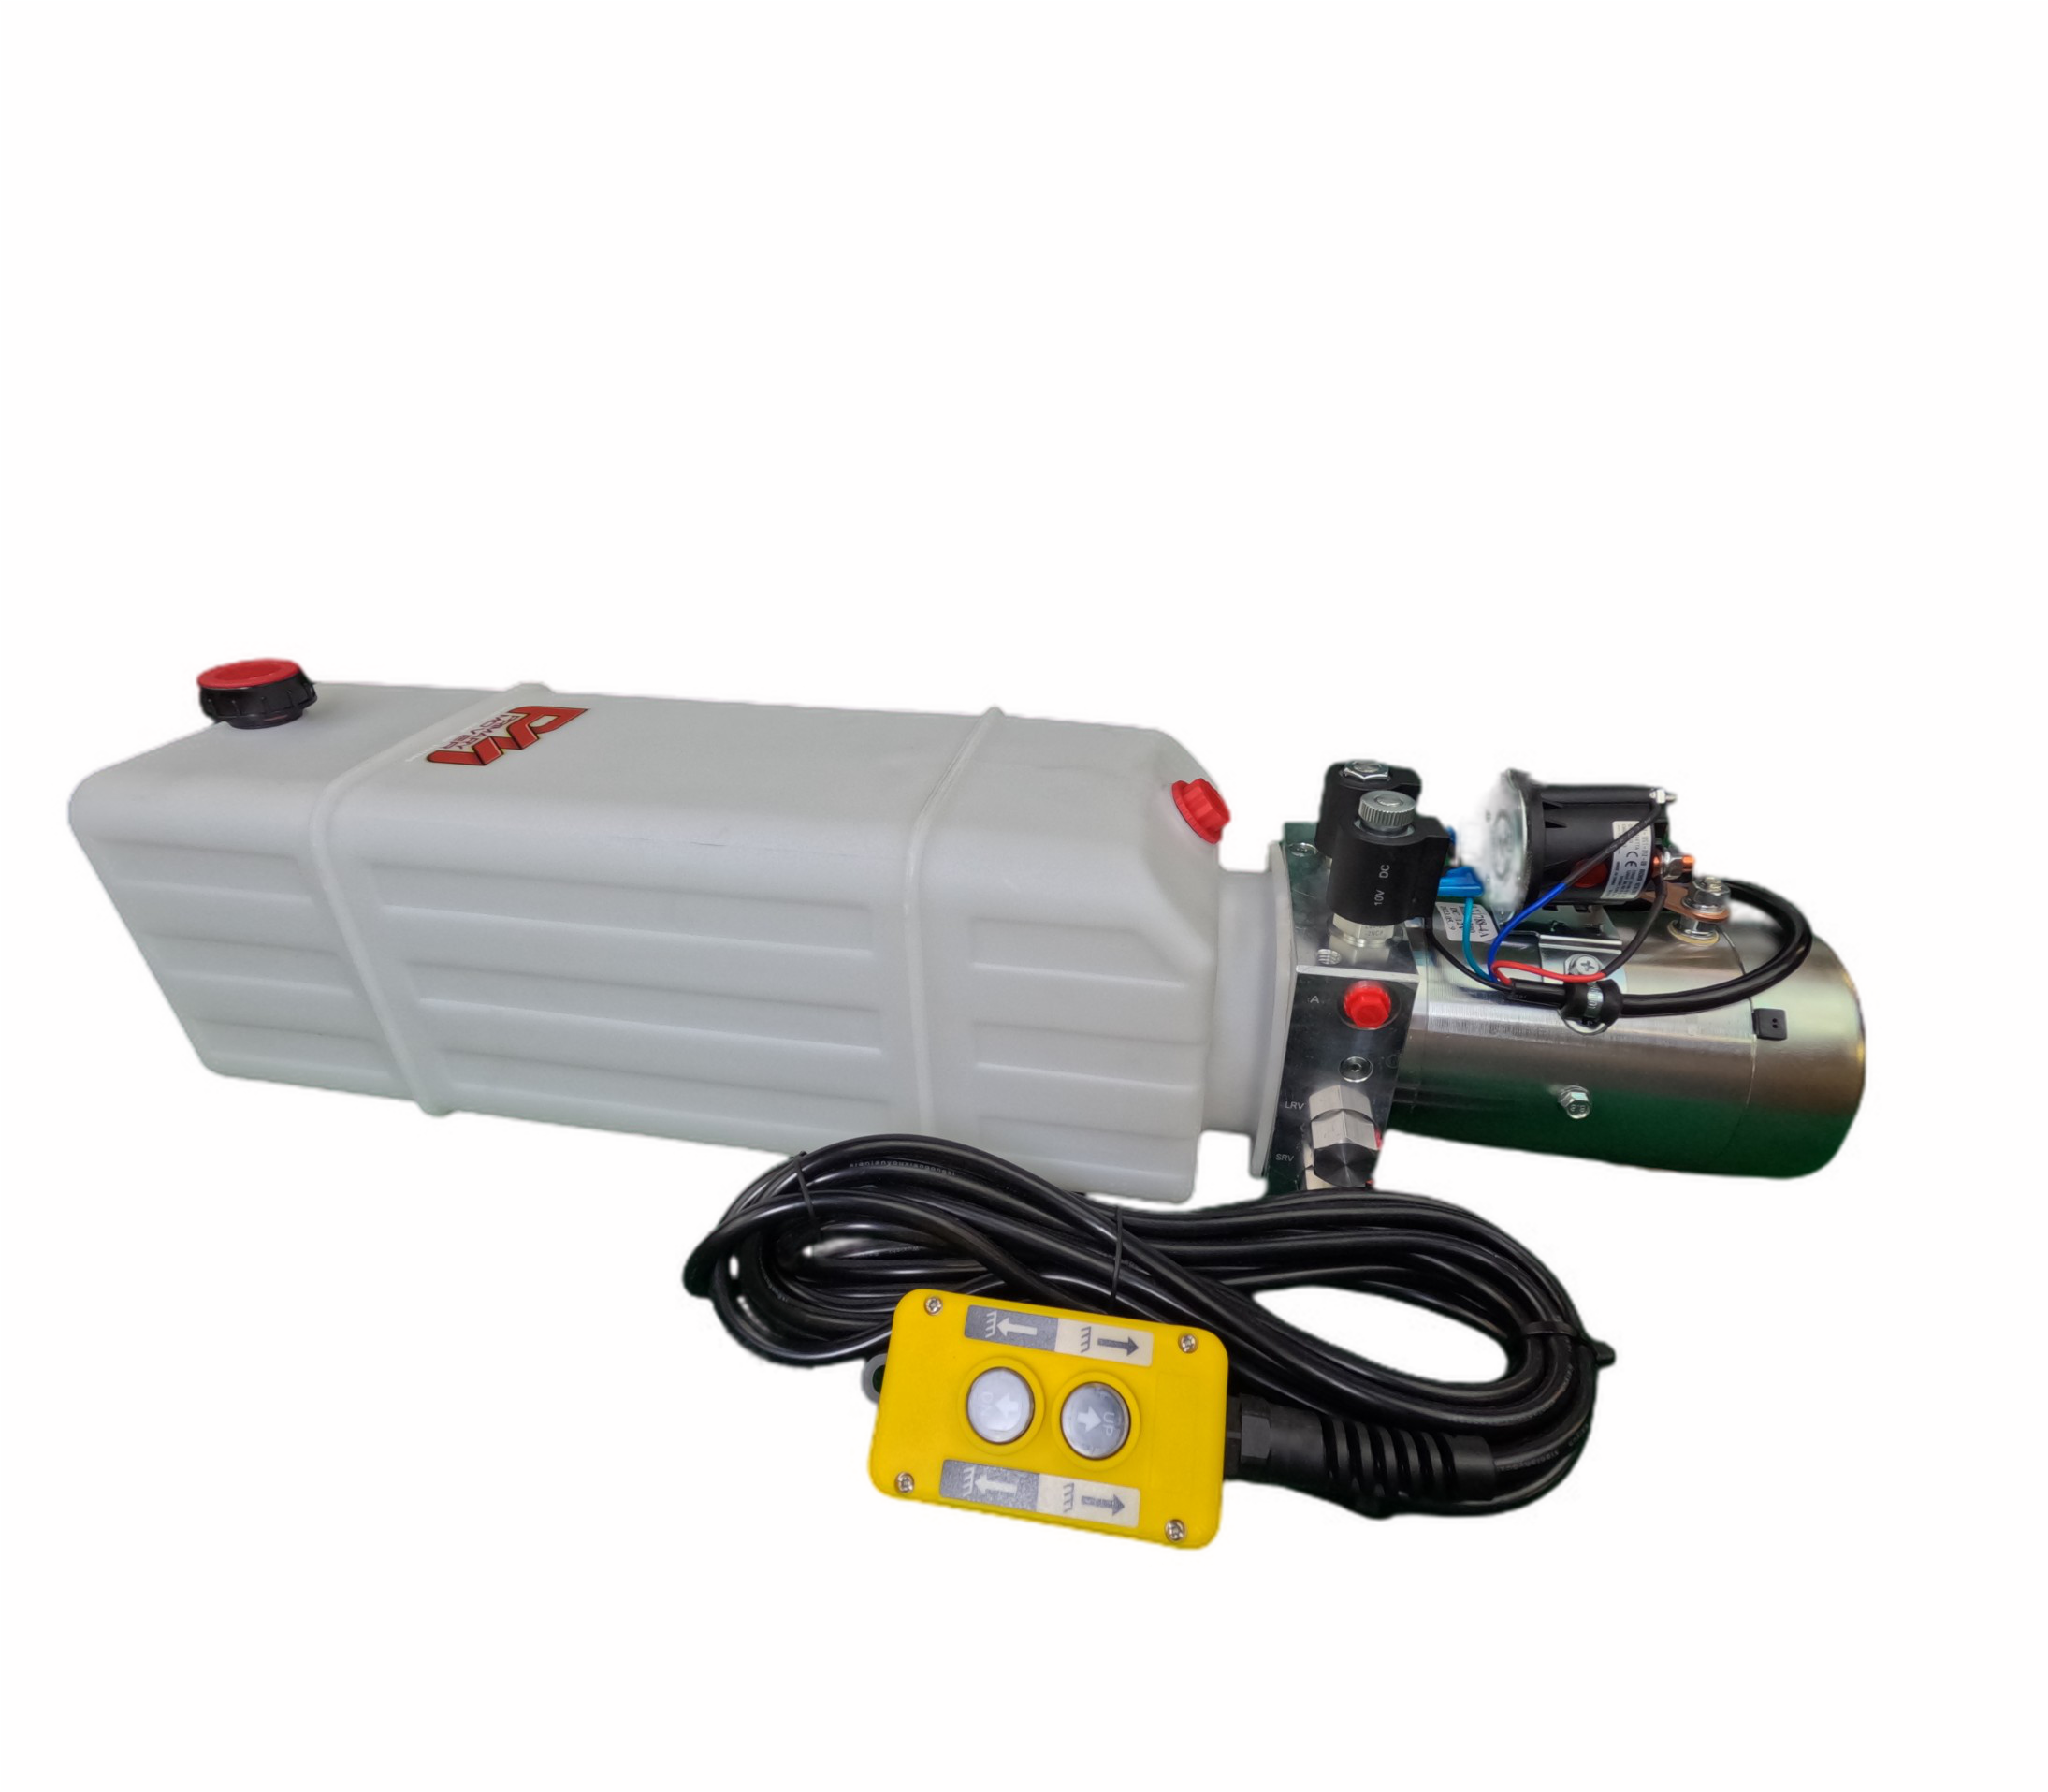 DLH 12V Double-Acting Hydraulic Pump - Poly Reservoir: A white plastic tank with a red button and black cable, offering reliable hydraulic power for dump bed trailers and trucks.